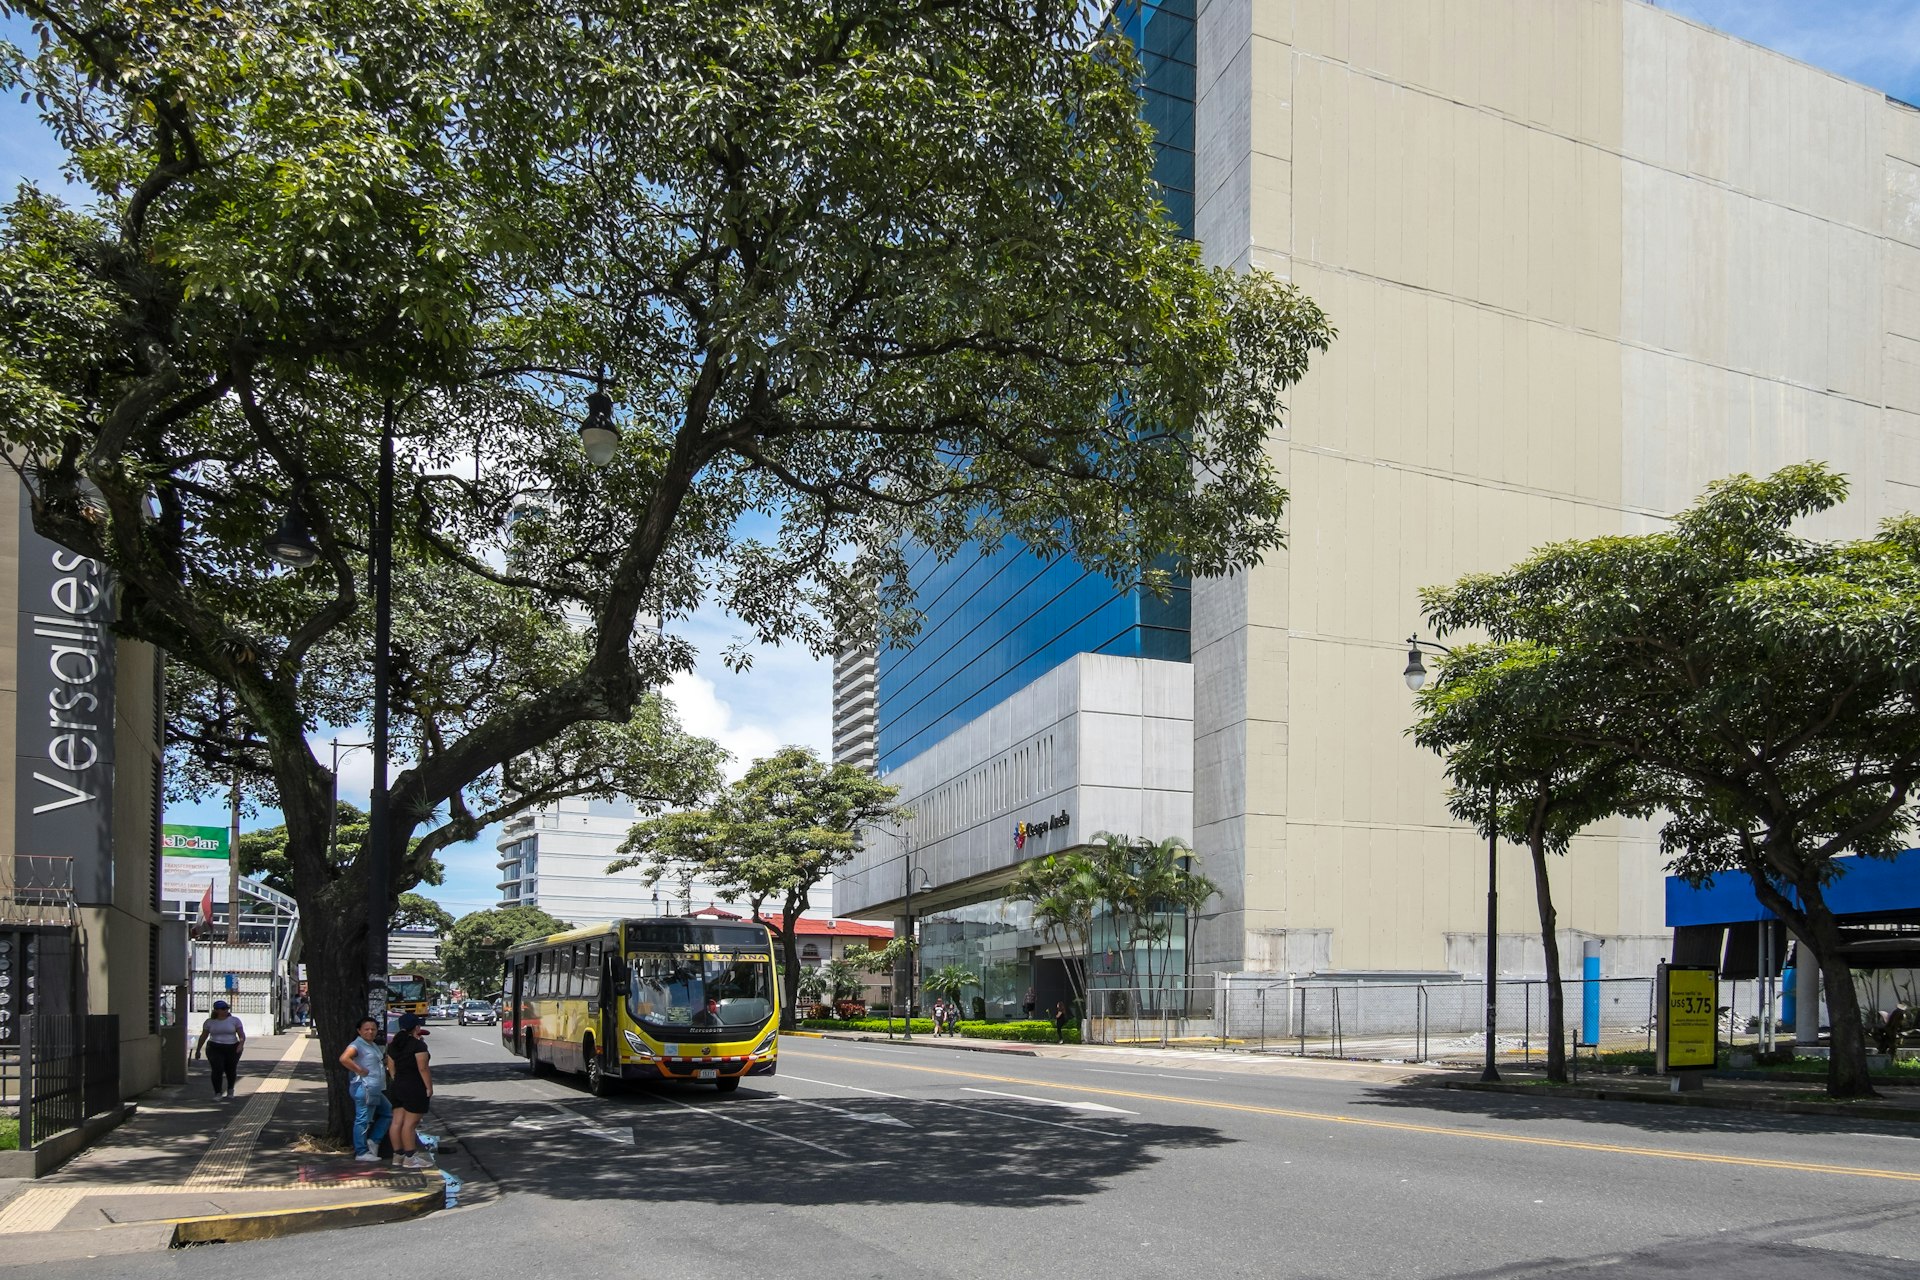 Traffic and buildings on Paseo Colon in the urban center of San José, Costa Rica